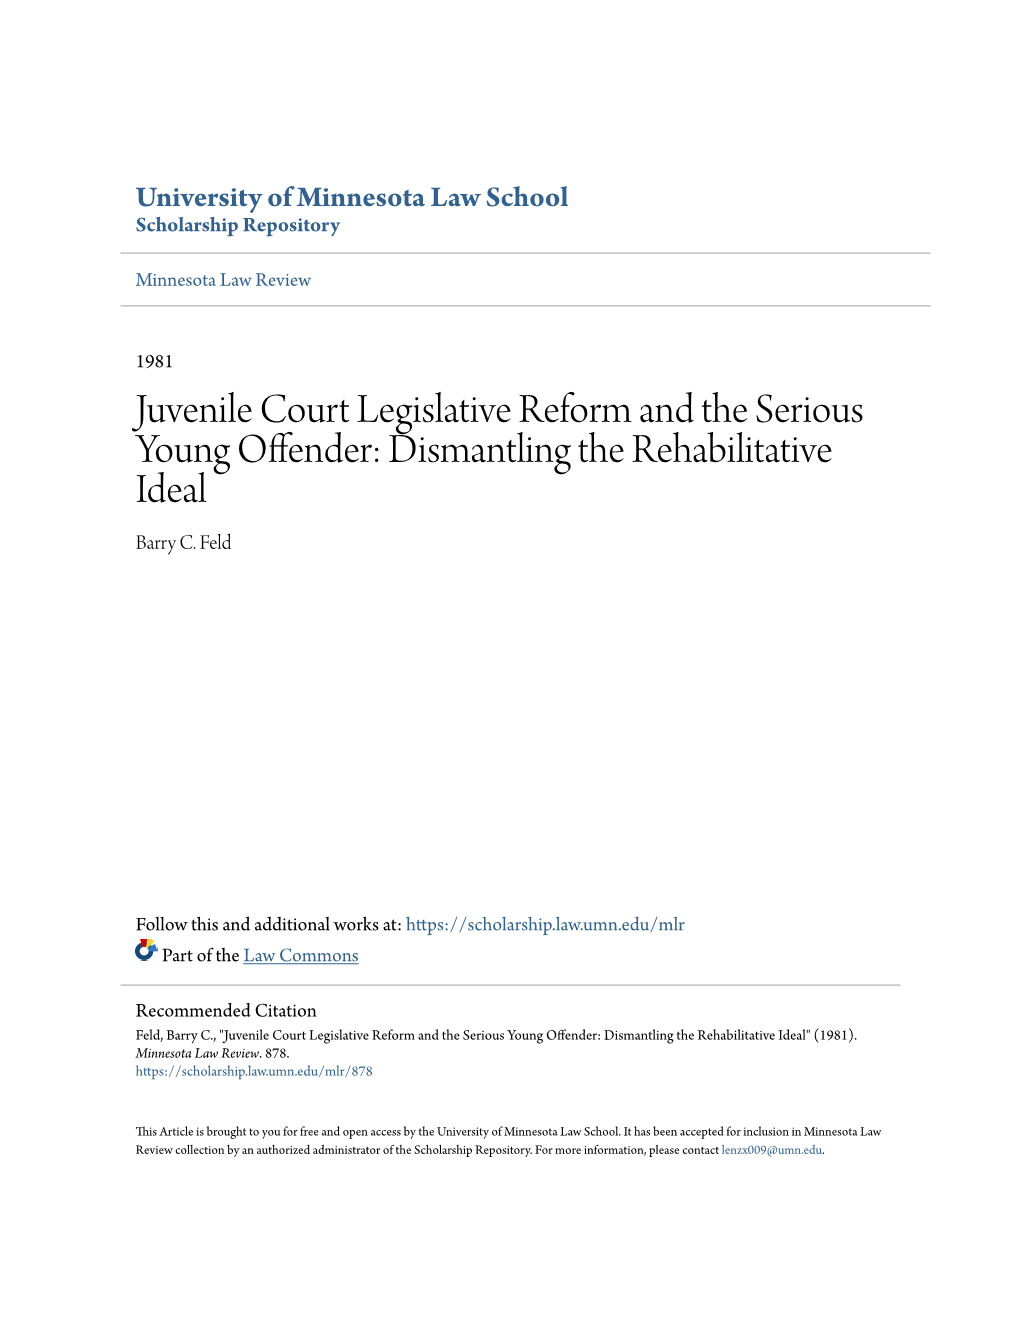 Juvenile Court Legislative Reform and the Serious Young Offender: Dismantling the Rehabilitative Ideal Barry C